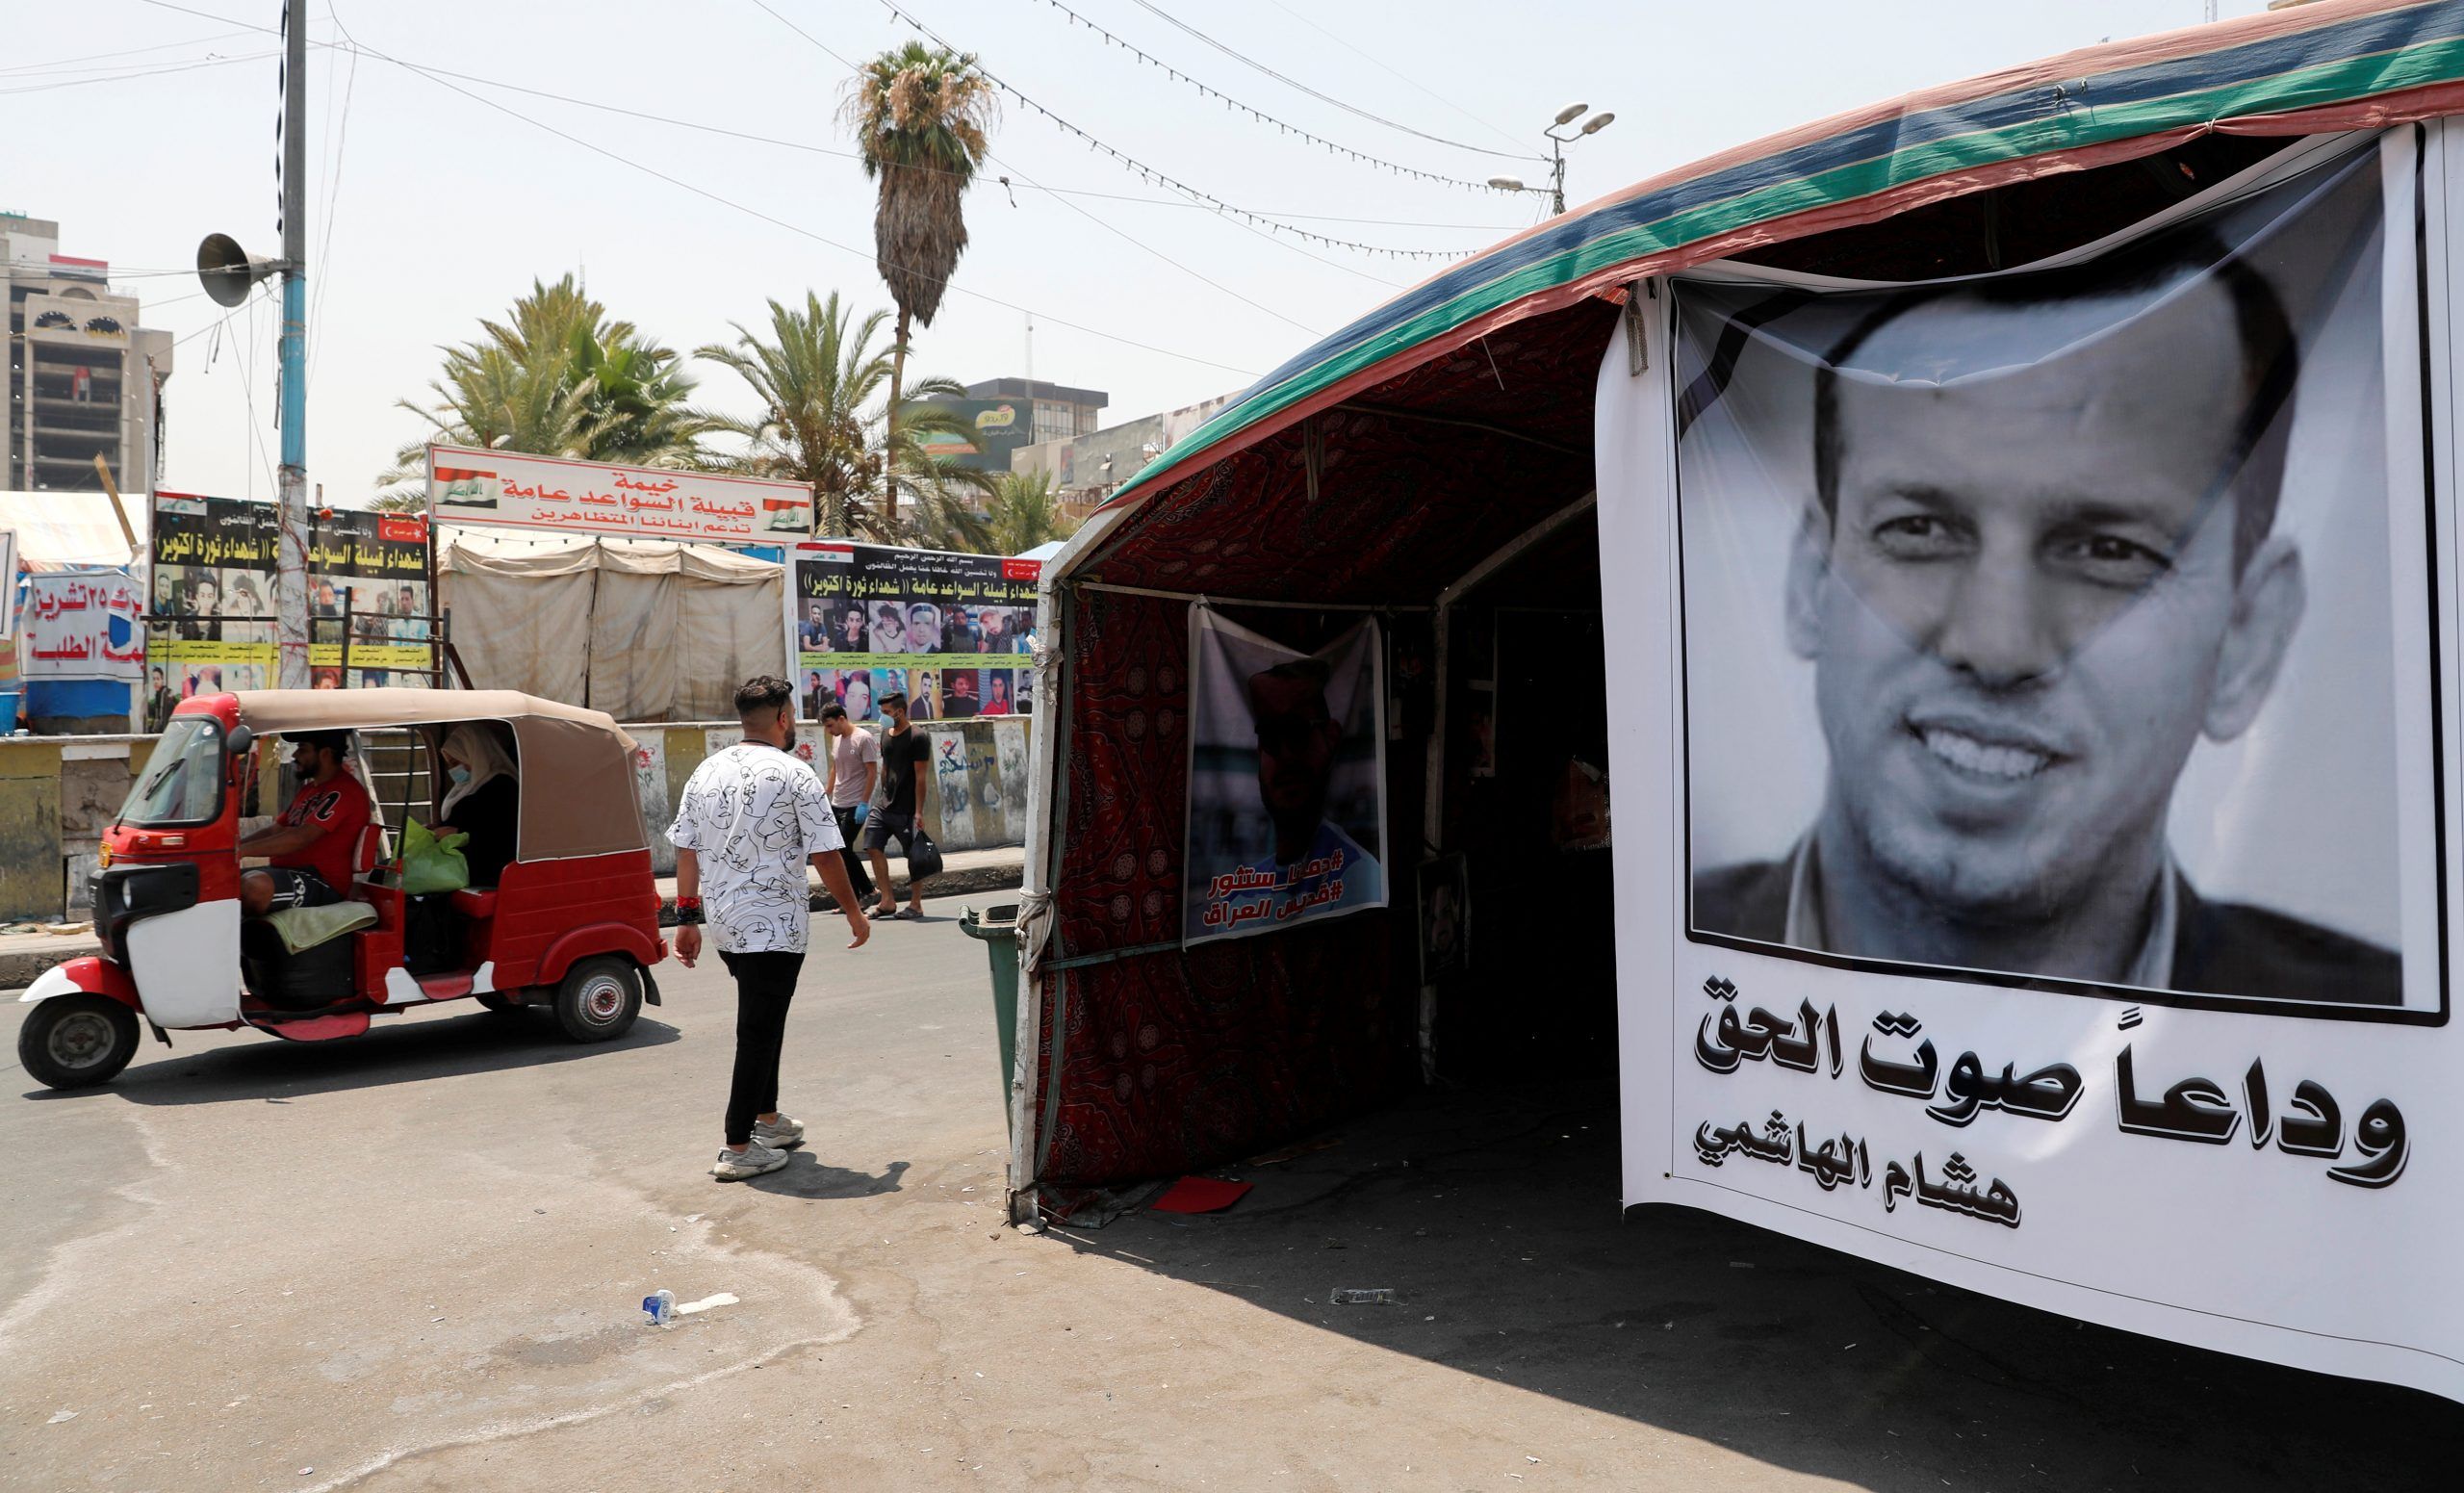 A poster depicting the former government advisor and political analyst Hisham al-Hashemi, who was killed by gunmen is seen at the Tahrir Square in Baghdad, Iraq July 8, 2020. REUTERS/Thaier al-Sudani